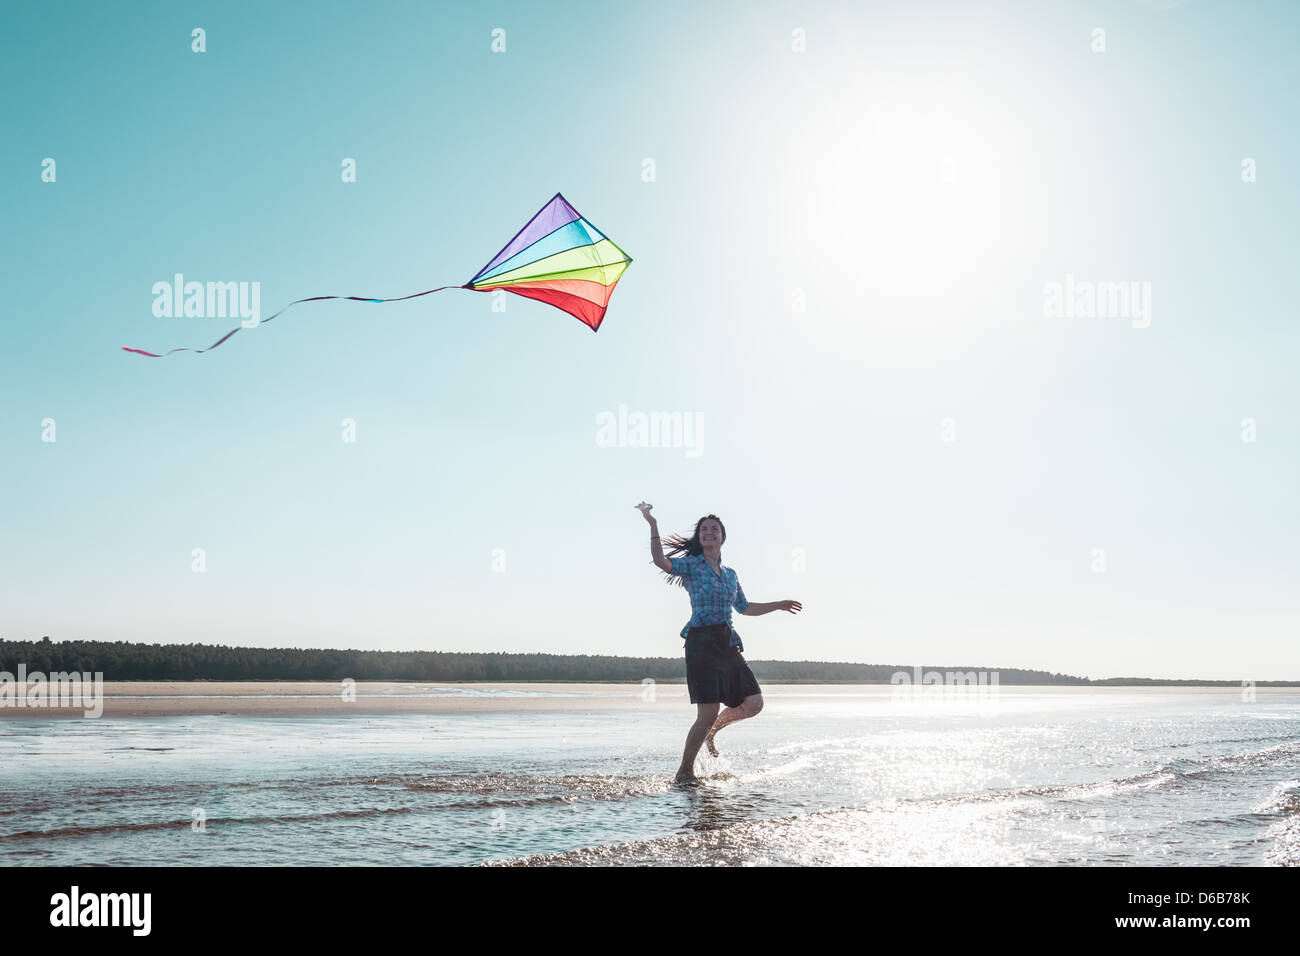 Woman flying kite on beach Banque D'Images